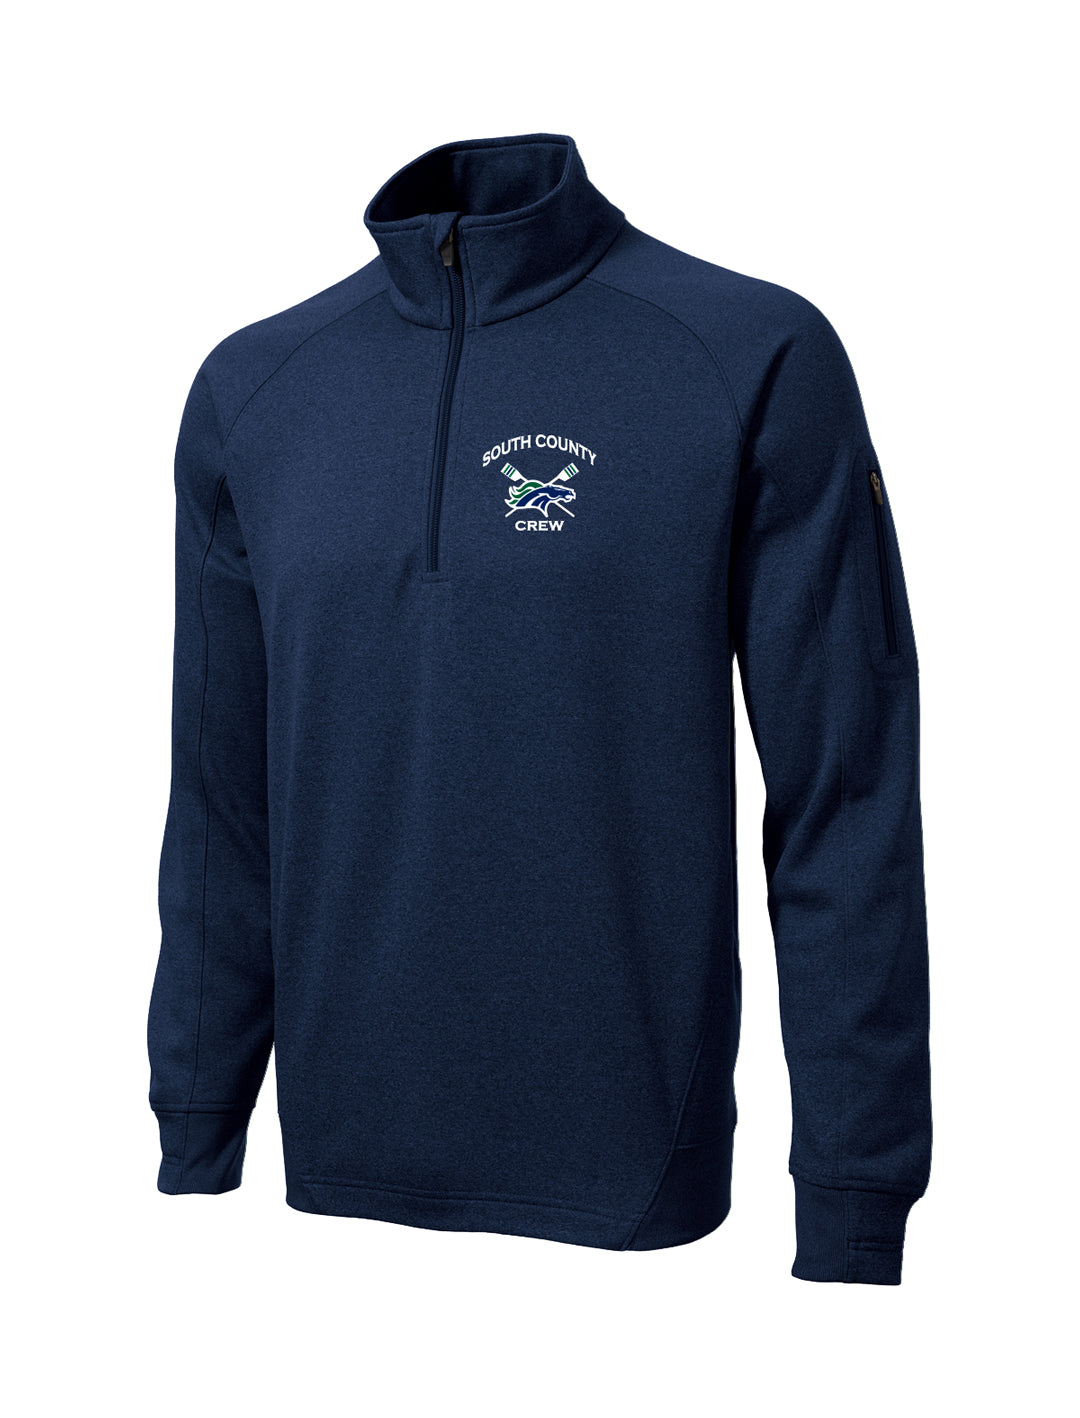 South County Crew Mens Performance Pullover